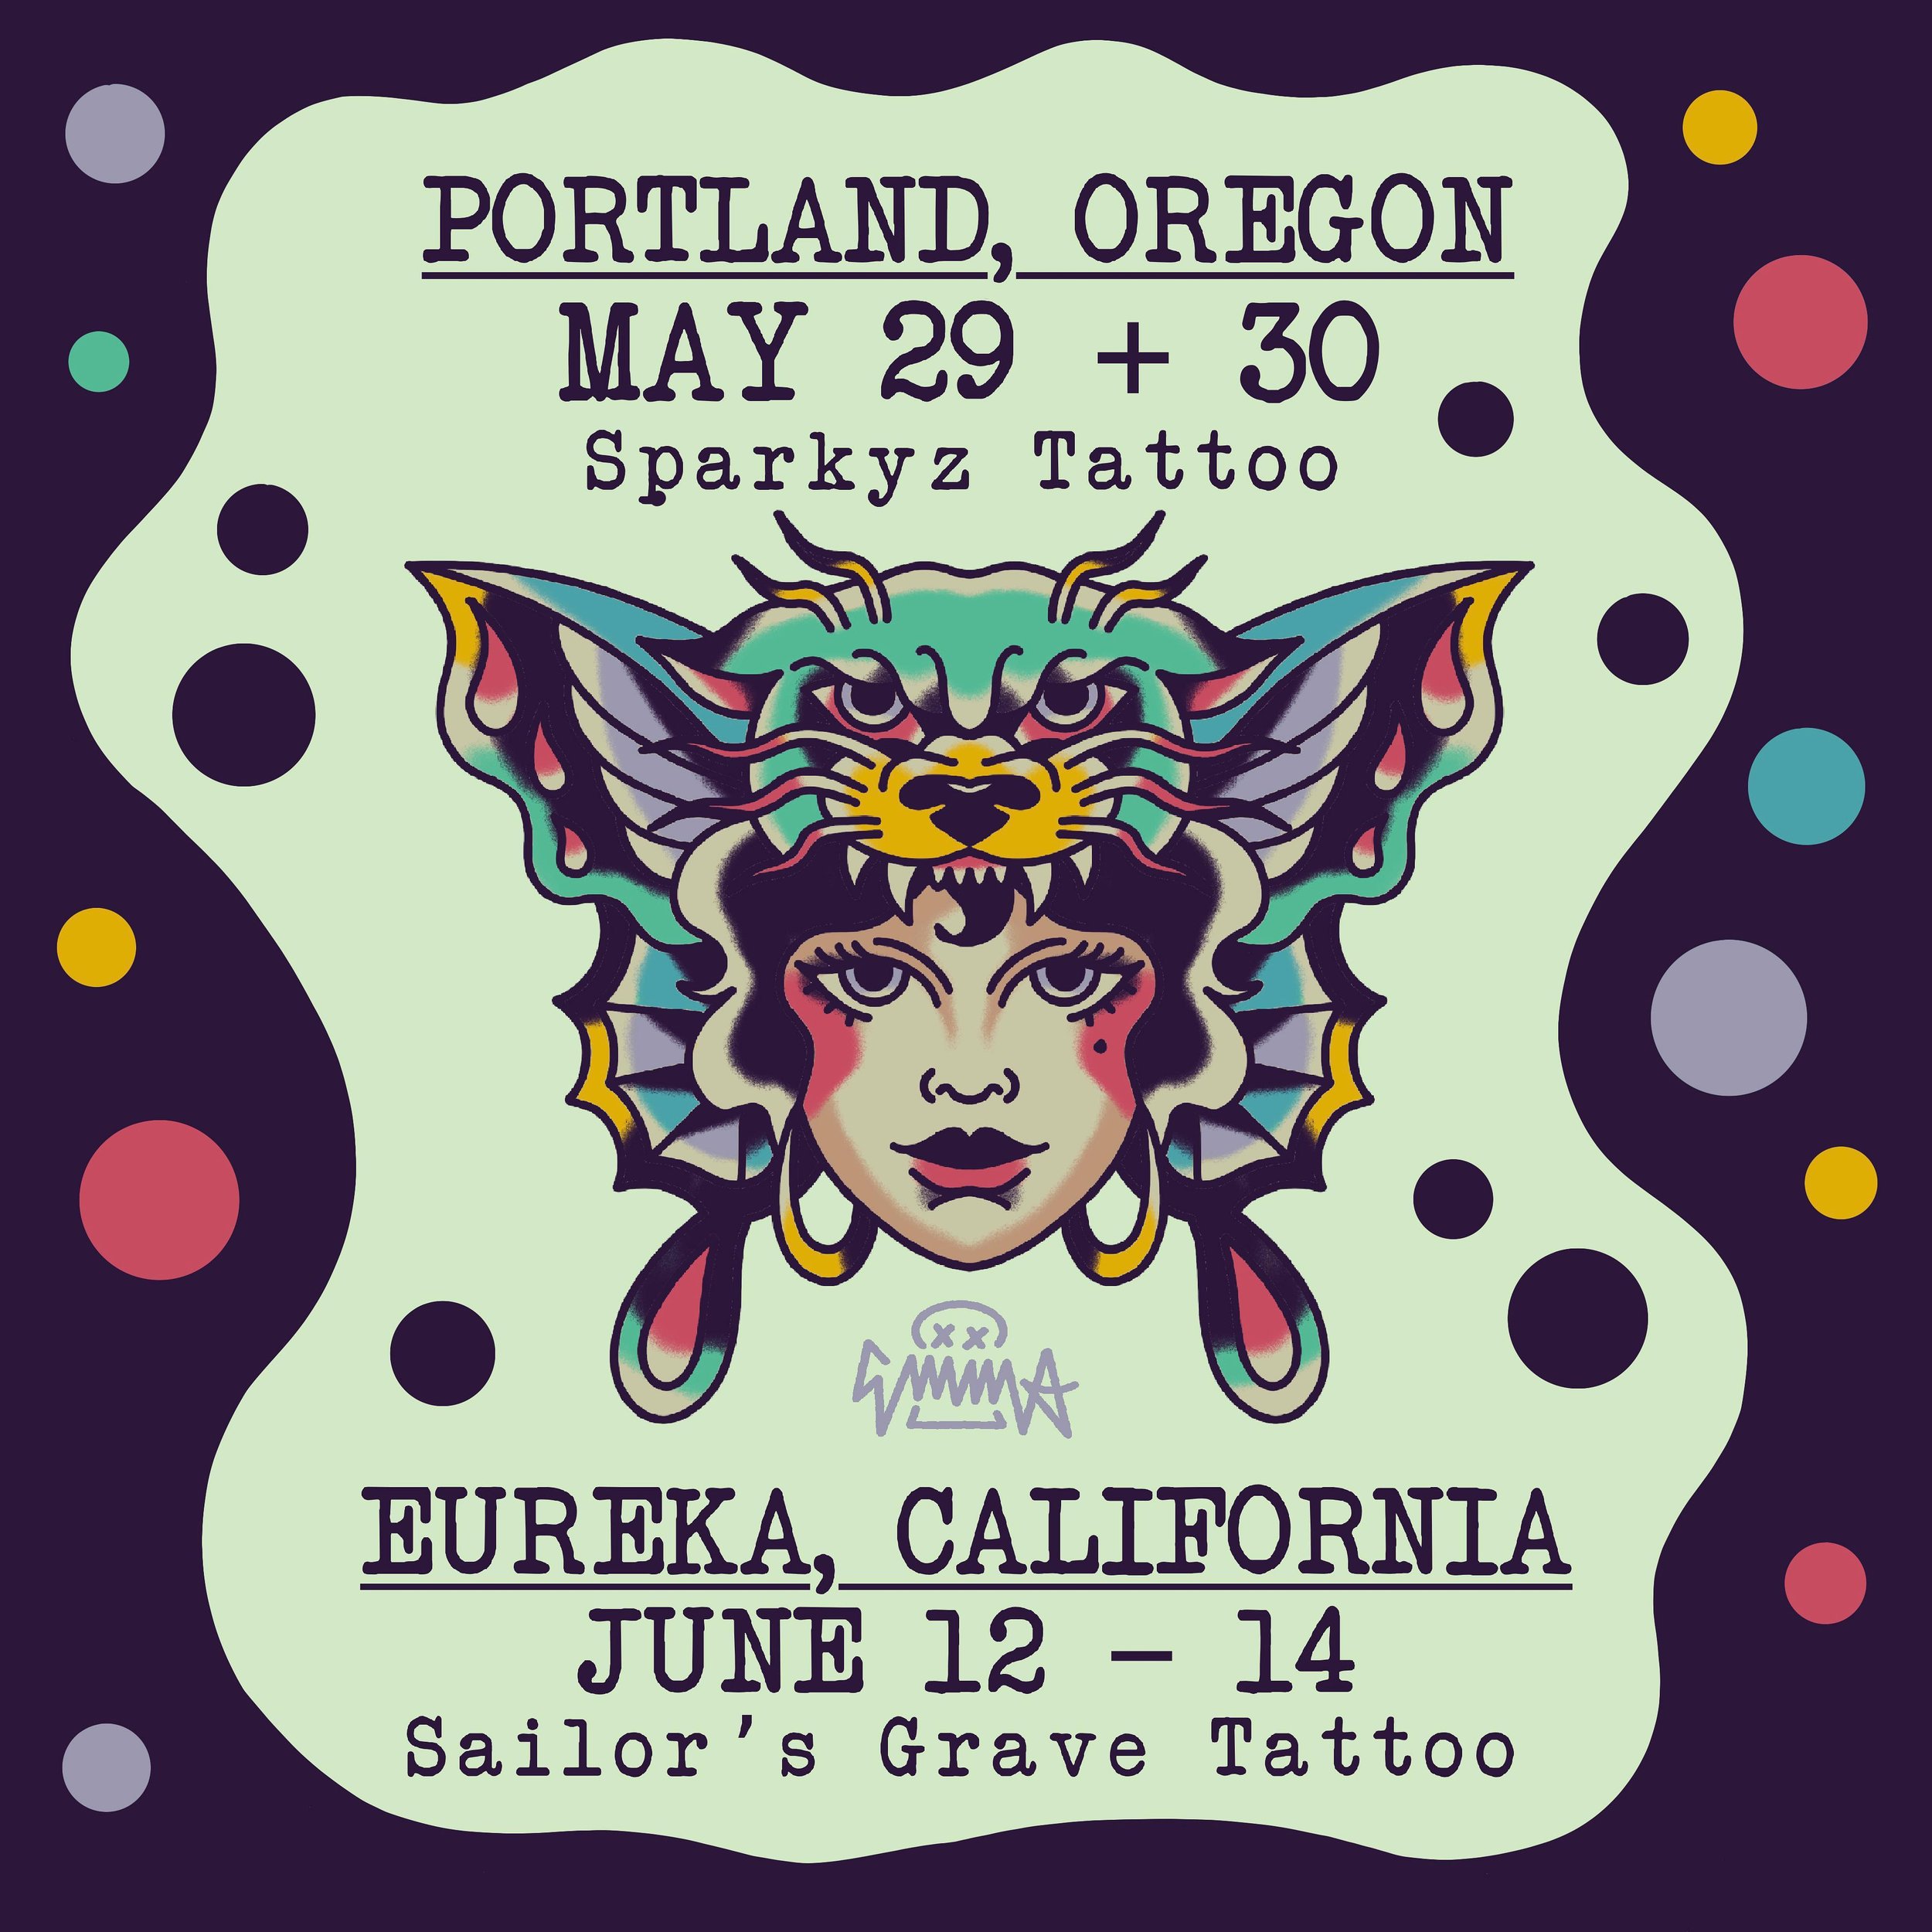 Aloha, I&rsquo;m excited to announce I will be on the road again later this month for my birthday trip!

✶ PORTLAND ✶
May 29 + 30
@sparkyztattoo 

✶ EUREKA ✶
June 12 - 14
@sailors_grave_tattoo_humboldt 

I will also be hanging around Sacramento the f